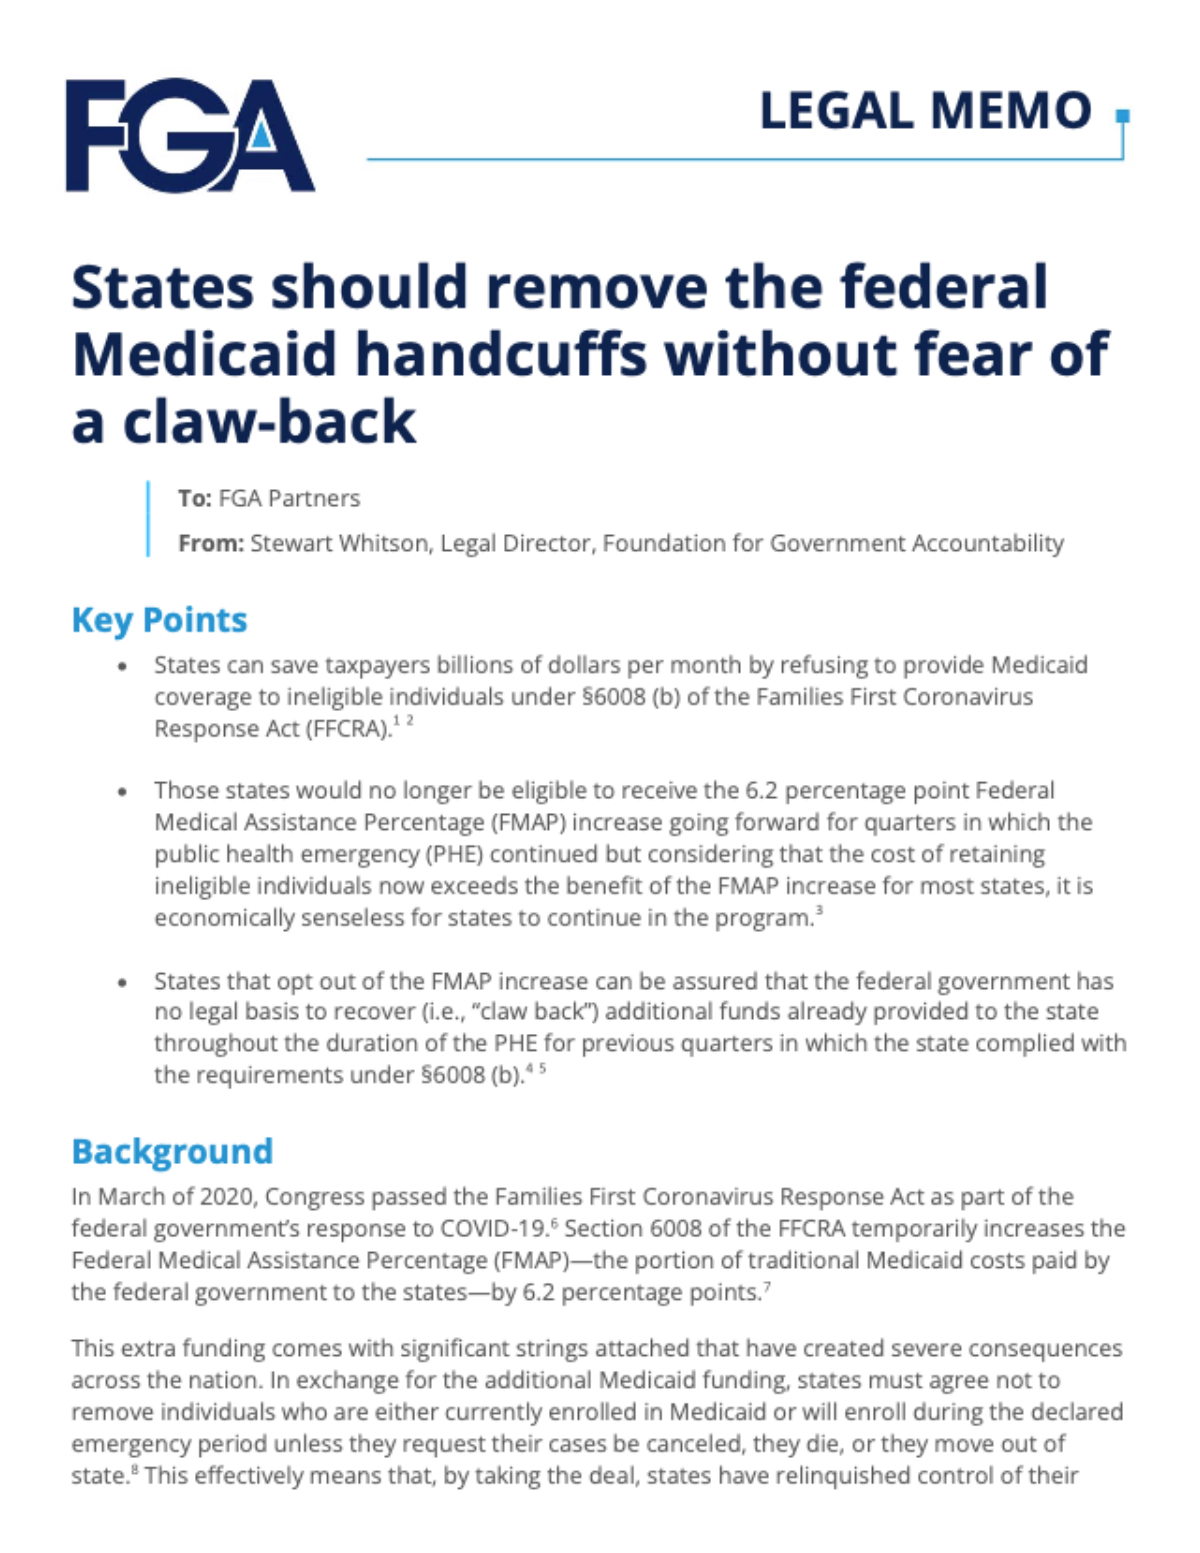 FGA Legal Memo: States Should Remove the Federal Medicaid Handcuffs Without Fear of a Claw-Back